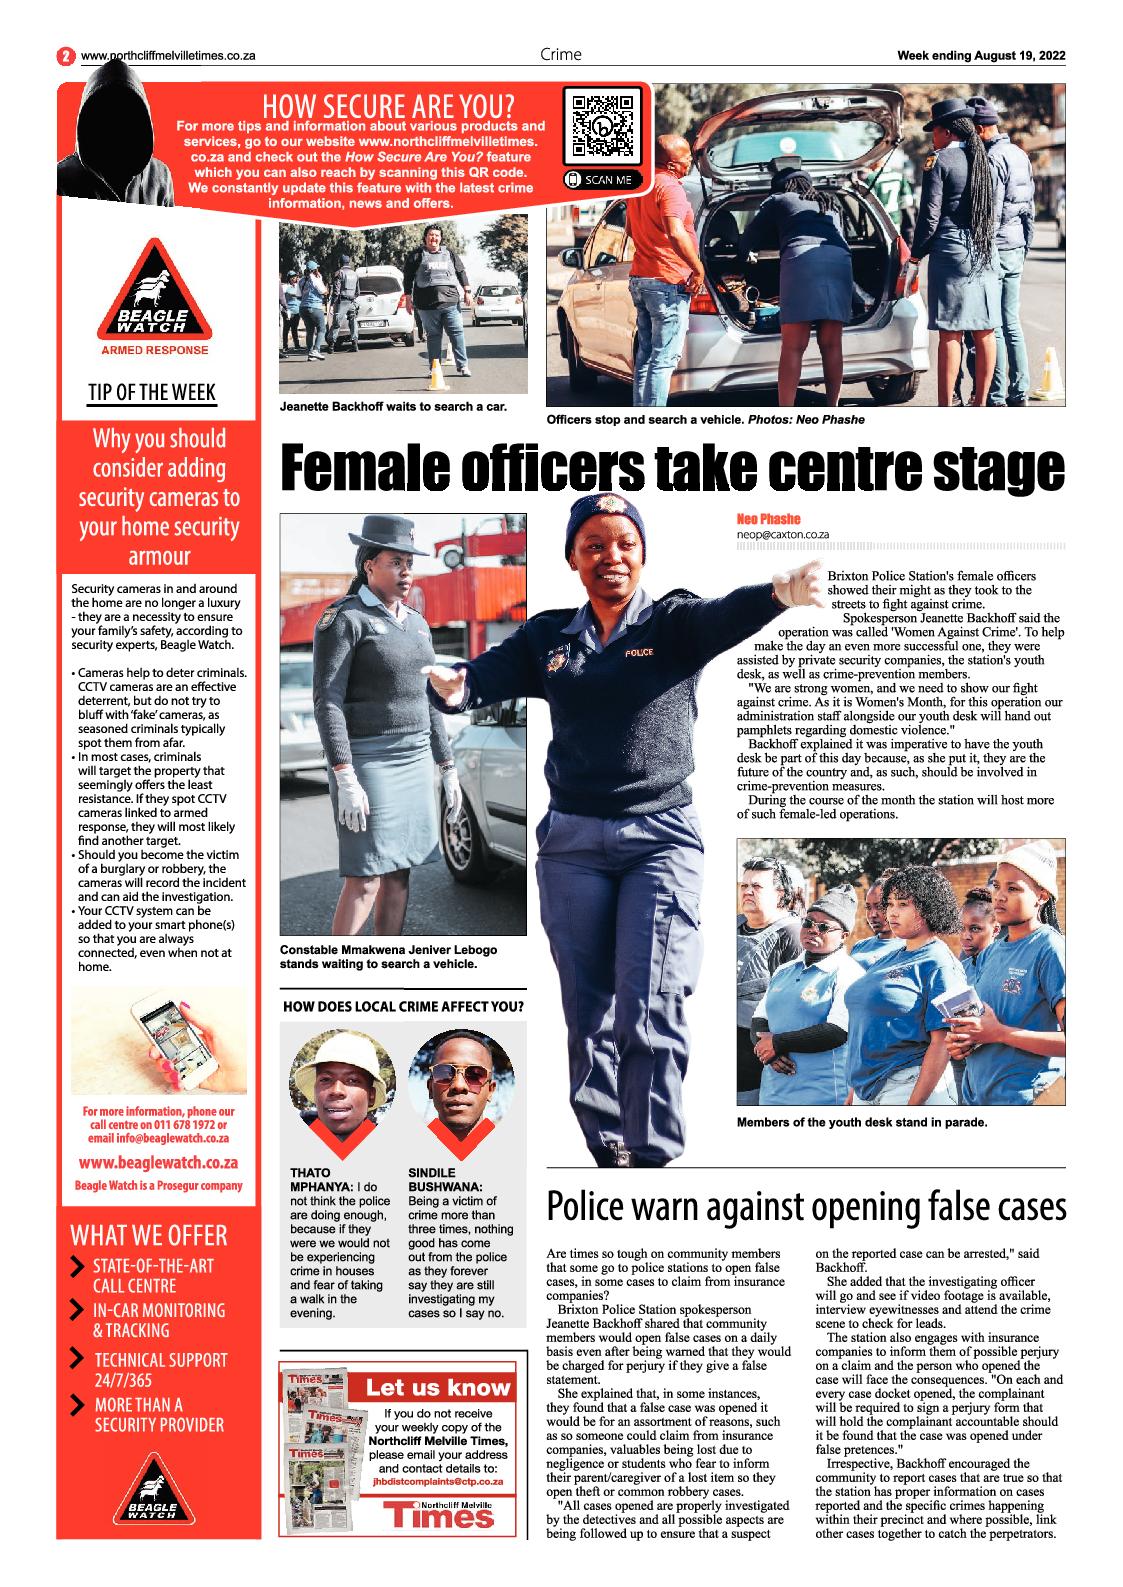 Northcliff Melville Times 19 August 2022 page 2